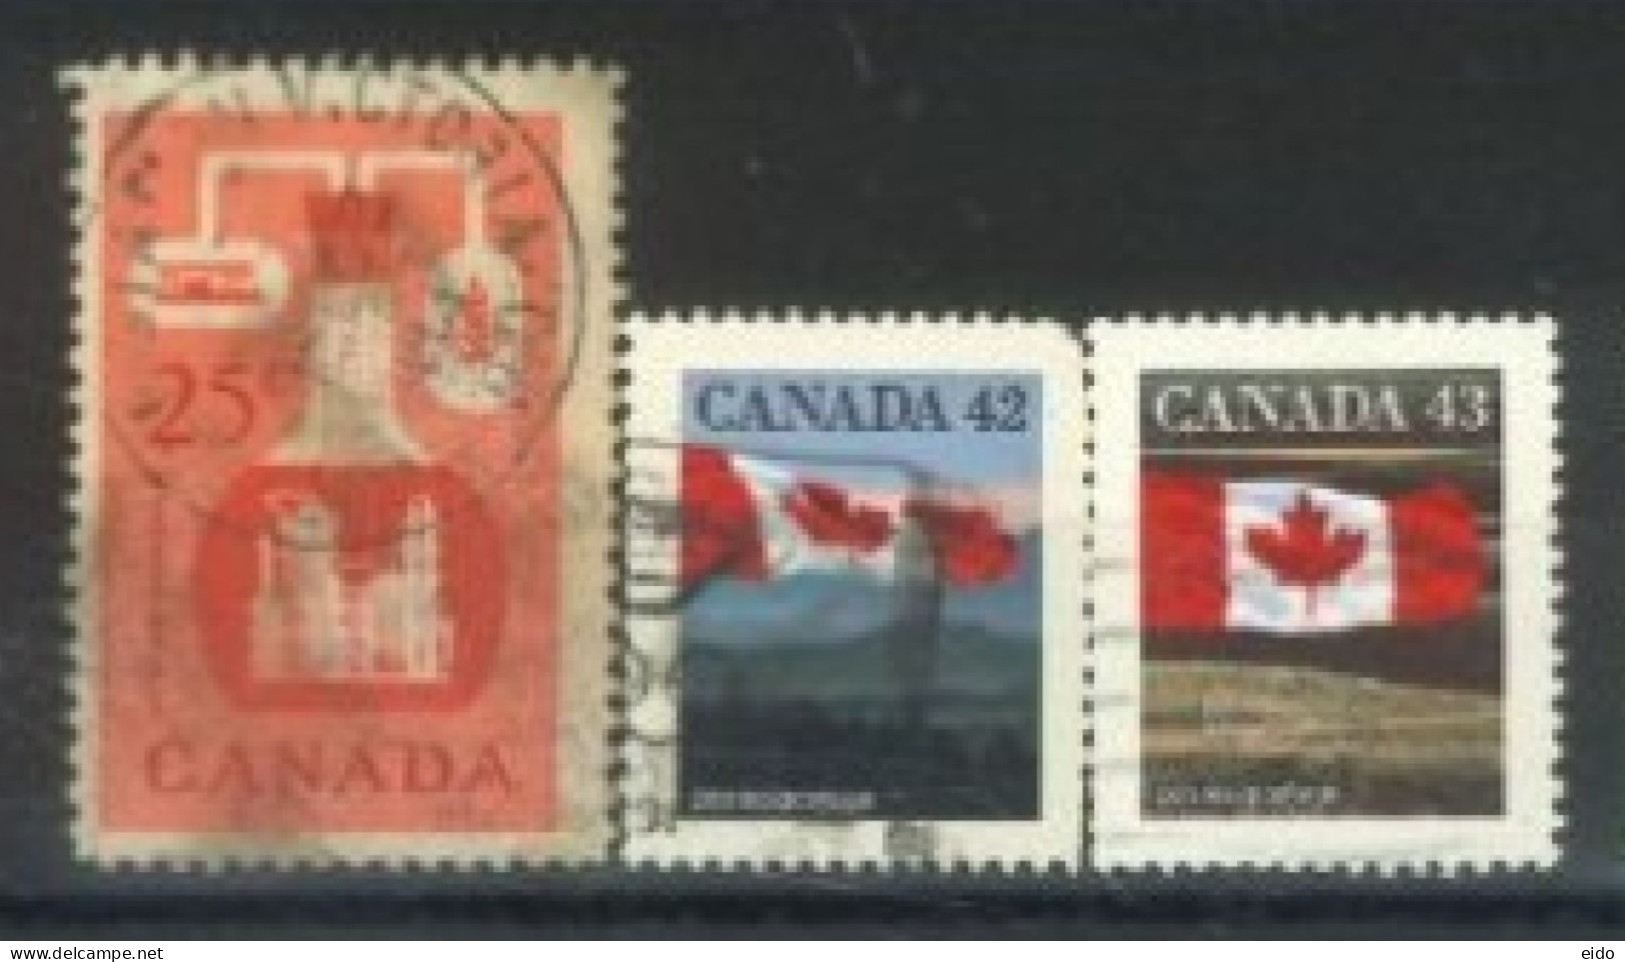 CANADA - STAMPS SET OF 3, USED. - Gebraucht